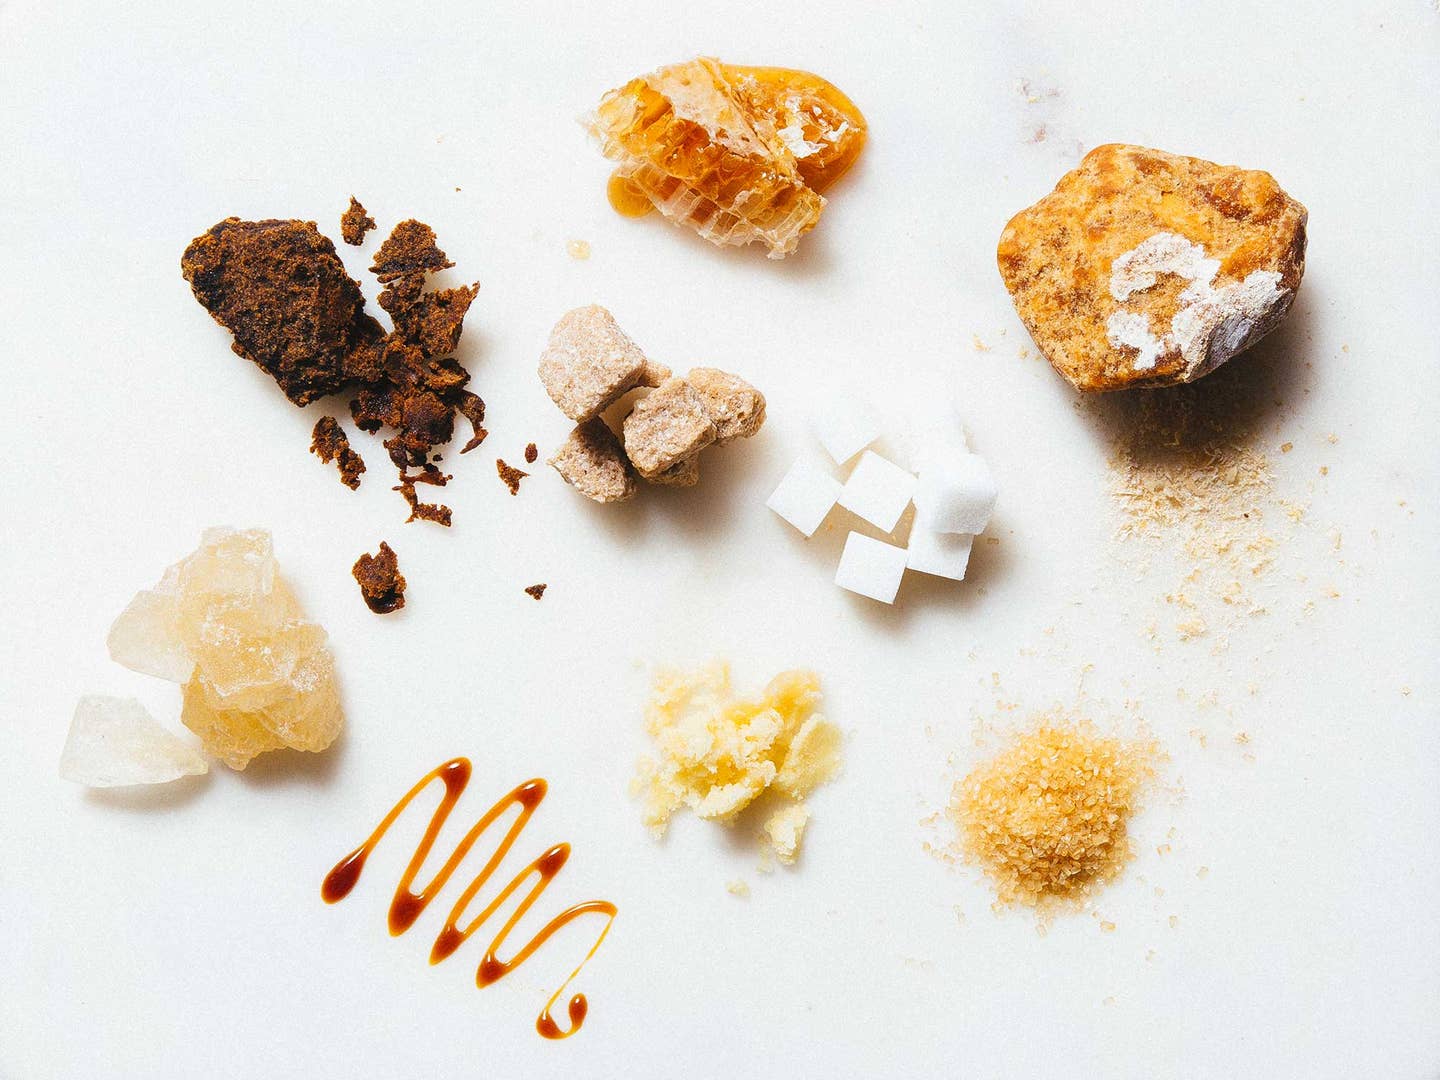 The Complete Guide to Sugar Around the World